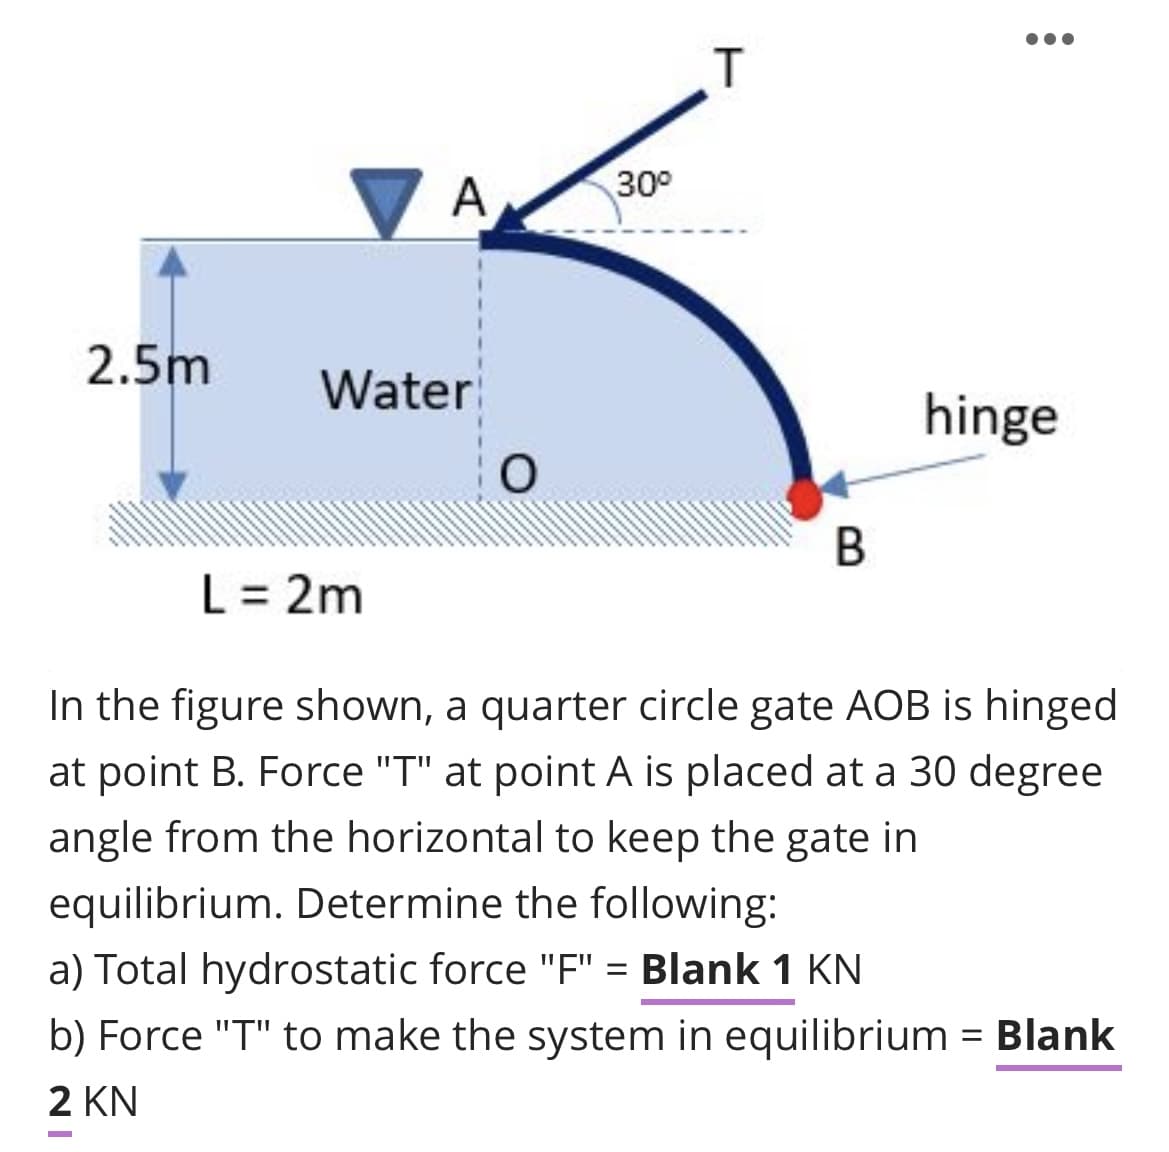 A
30°
2.5m
Water
hinge
В
L = 2m
In the figure shown, a quarter circle gate AOB is hinged
at point B. Force "T" at point A is placed at a 30 degree
angle from the horizontal to keep the gate in
equilibrium. Determine the following:
a) Total hydrostatic force "F" = Blank 1 KN
b) Force "T" to make the system in equilibrium = Blank
2 KN
